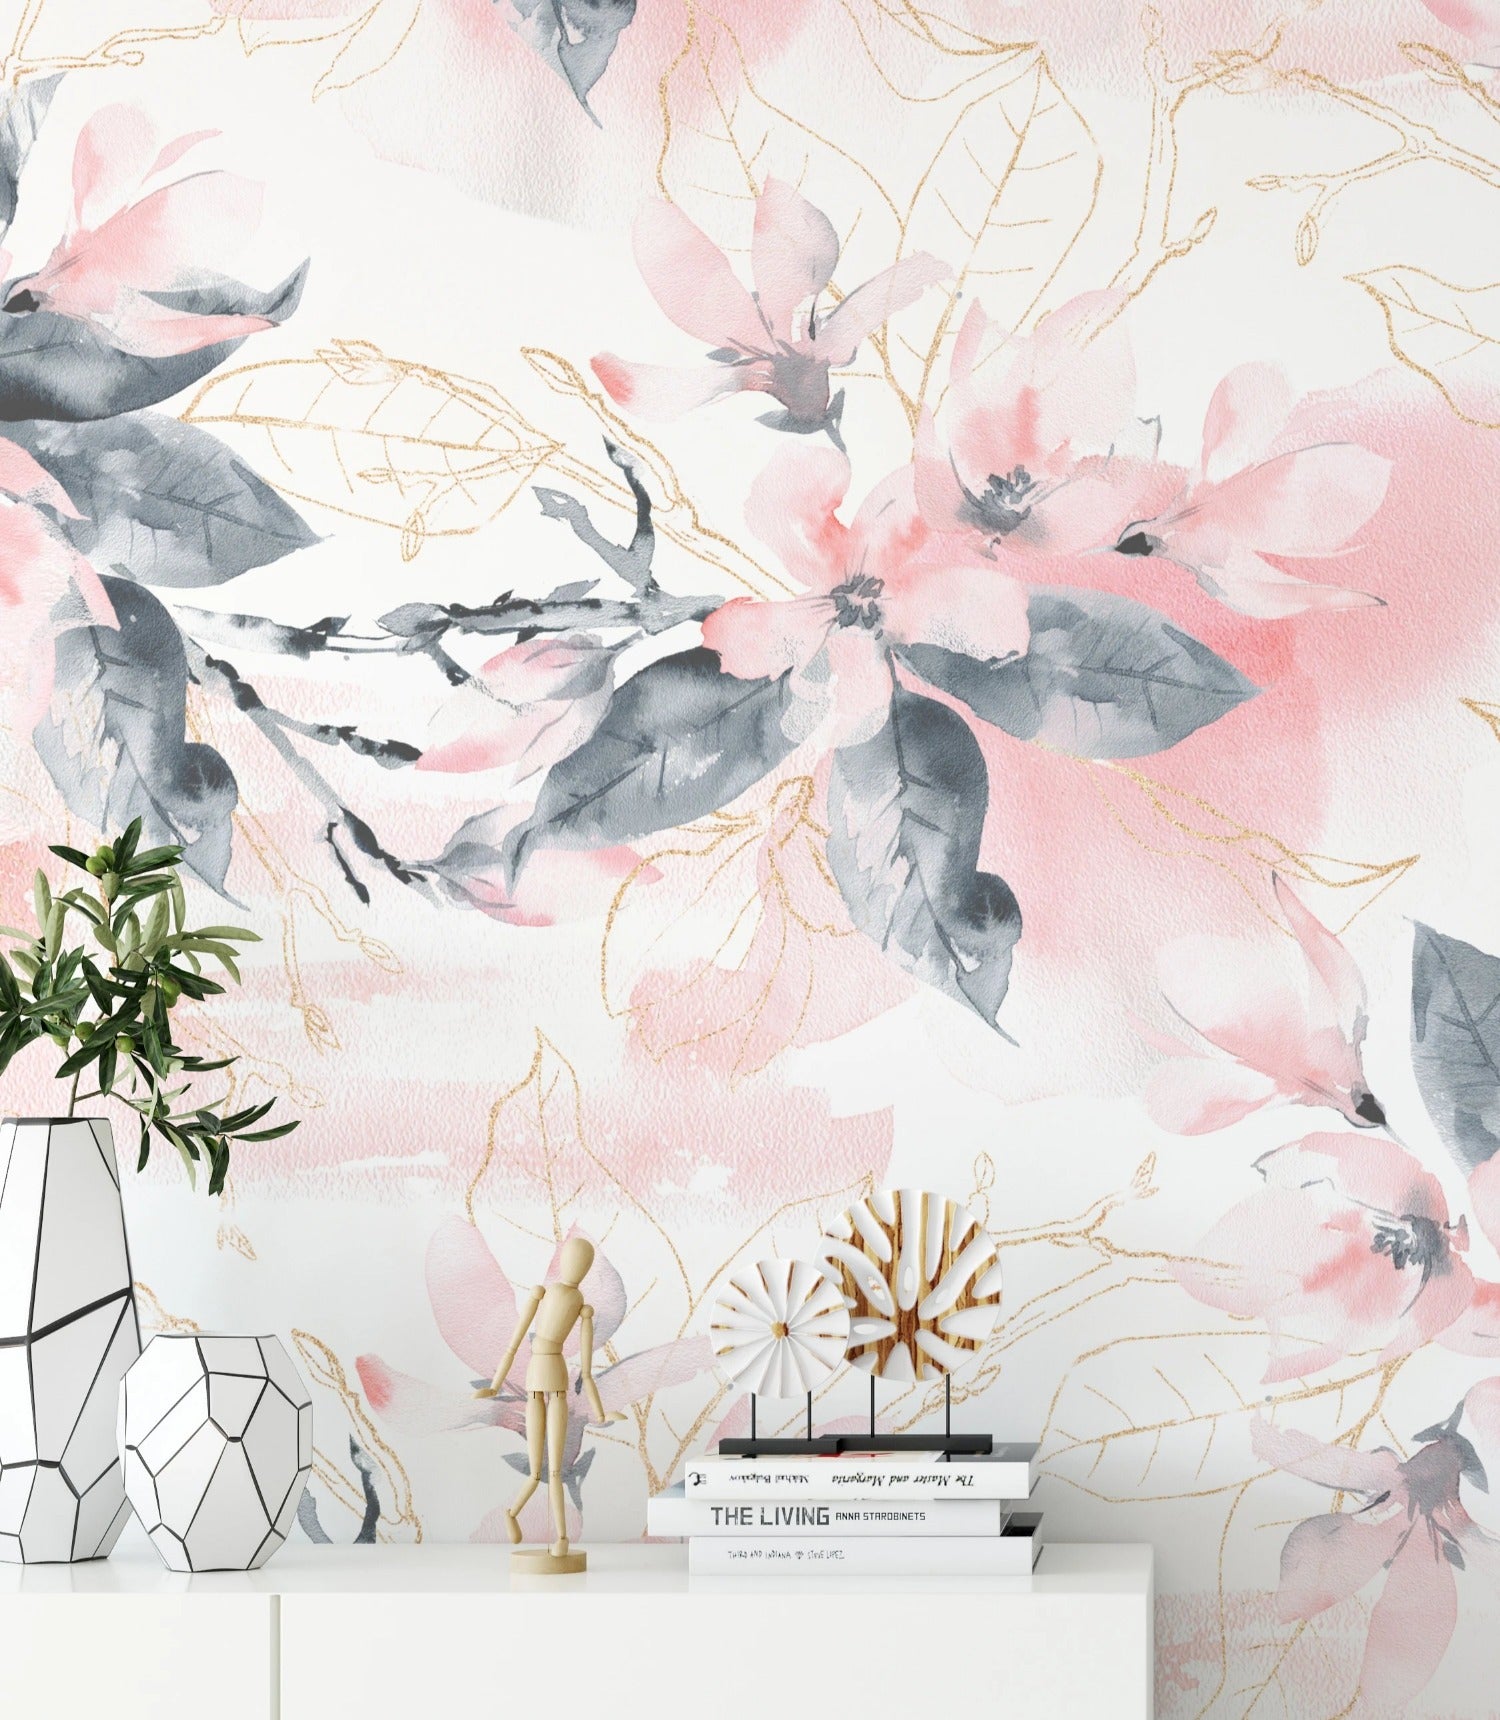 Interior design featuring the Elegant Wisdom Wallpaper VIII with light pink blossoms and golden branches over gray foliage, complementing a modern white and neutral toned room with stylish decor.